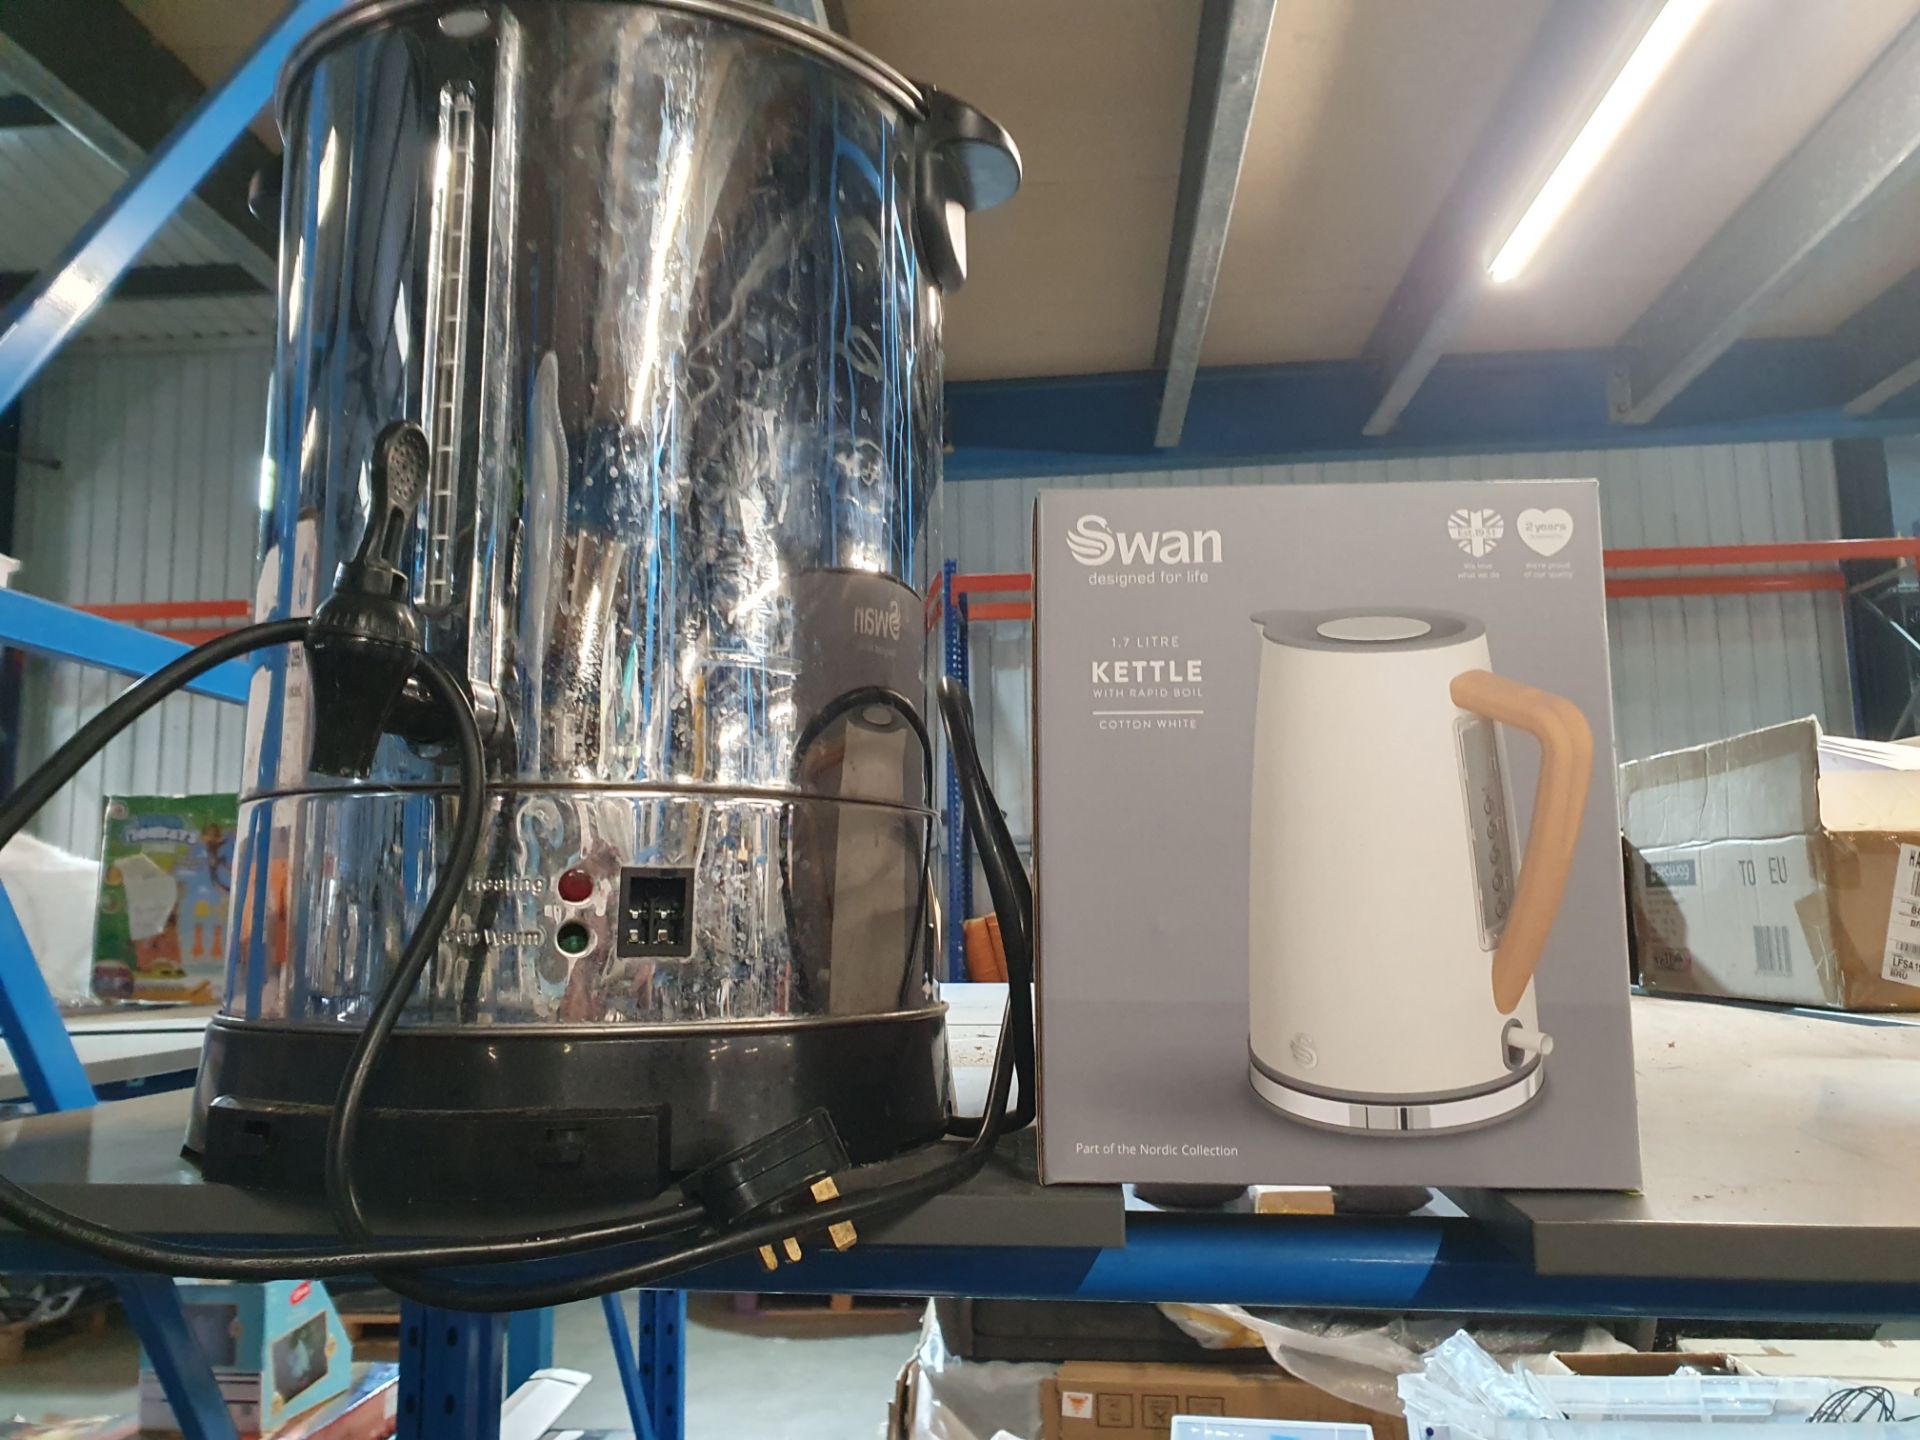 (R5) Large Qty Of Paper Plates, Napkins, Tea Towels. Kitchen Items. Swan Kettle. Water Boiler - Image 6 of 6